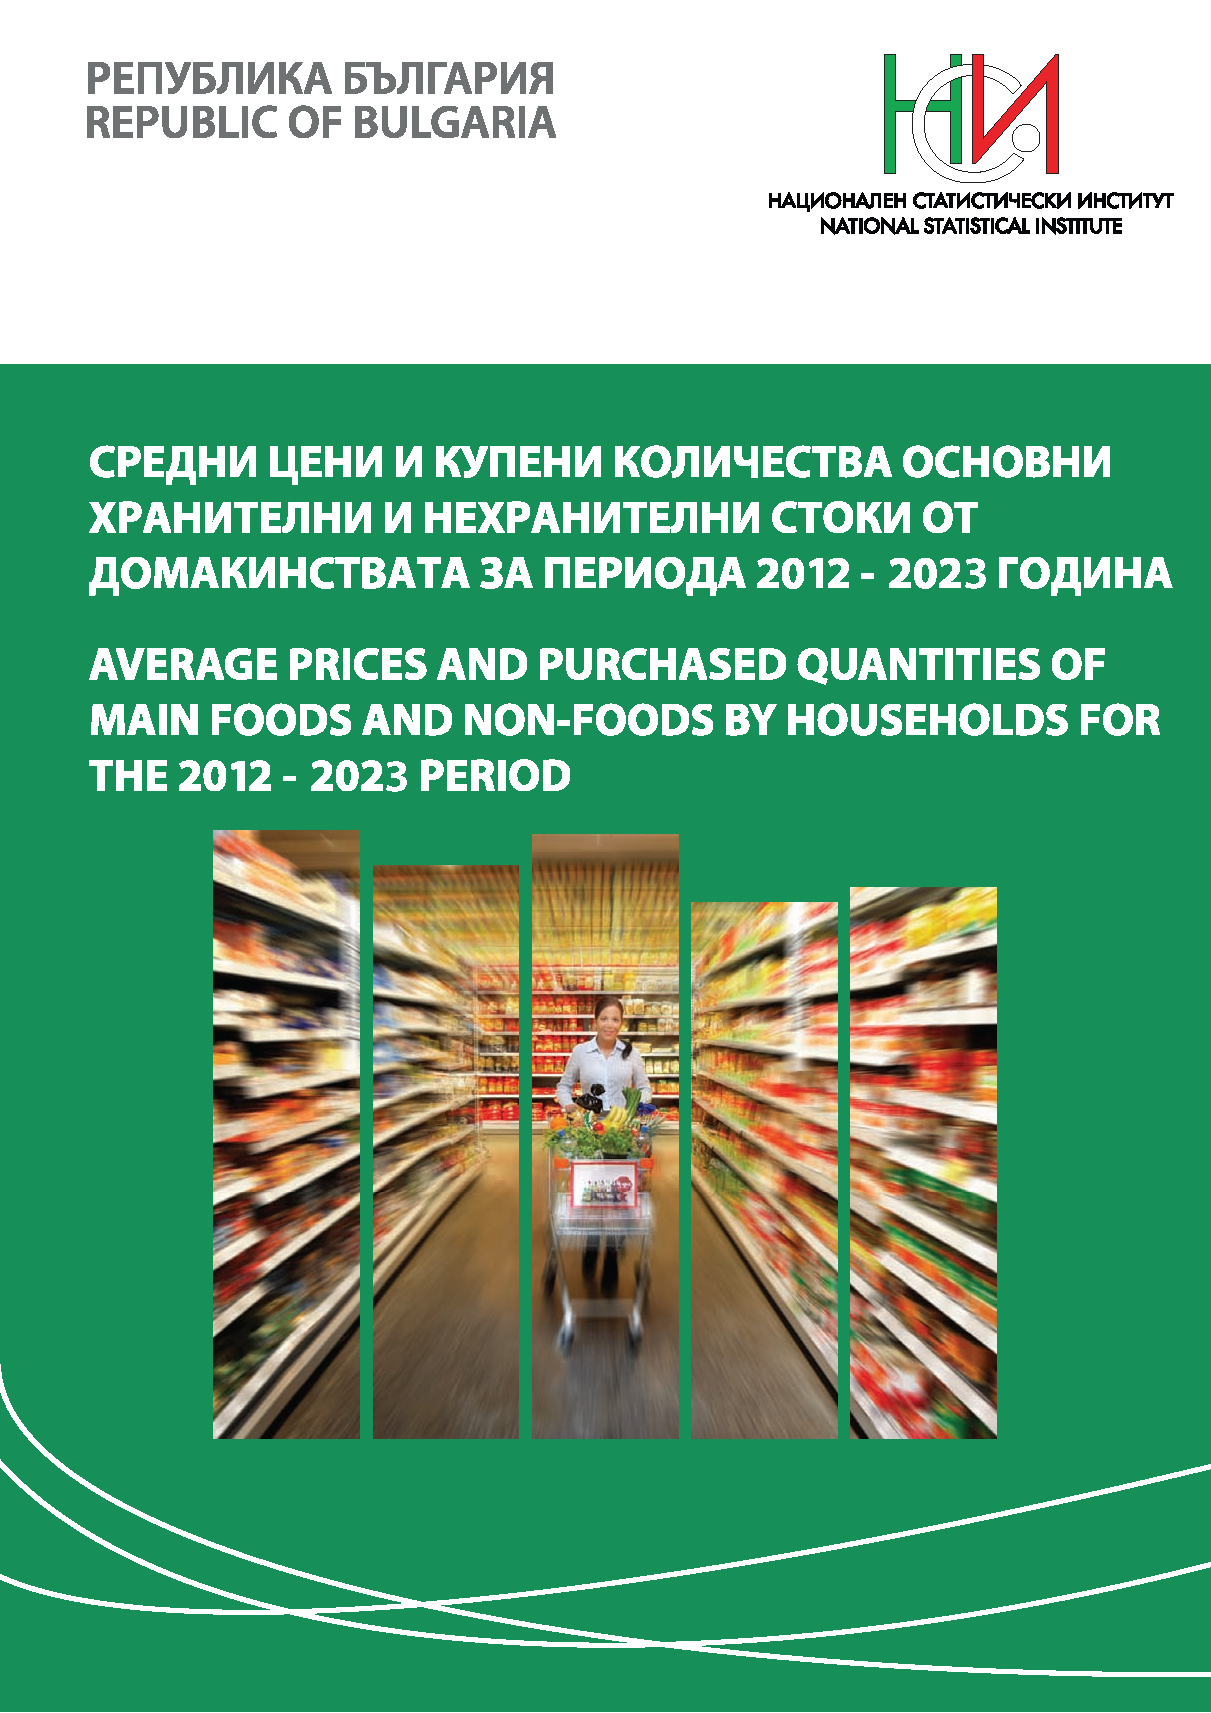 Average Prices and Purchased Quantities of Main Foods and Non-Foods by Households for the 2012 - 2023 period